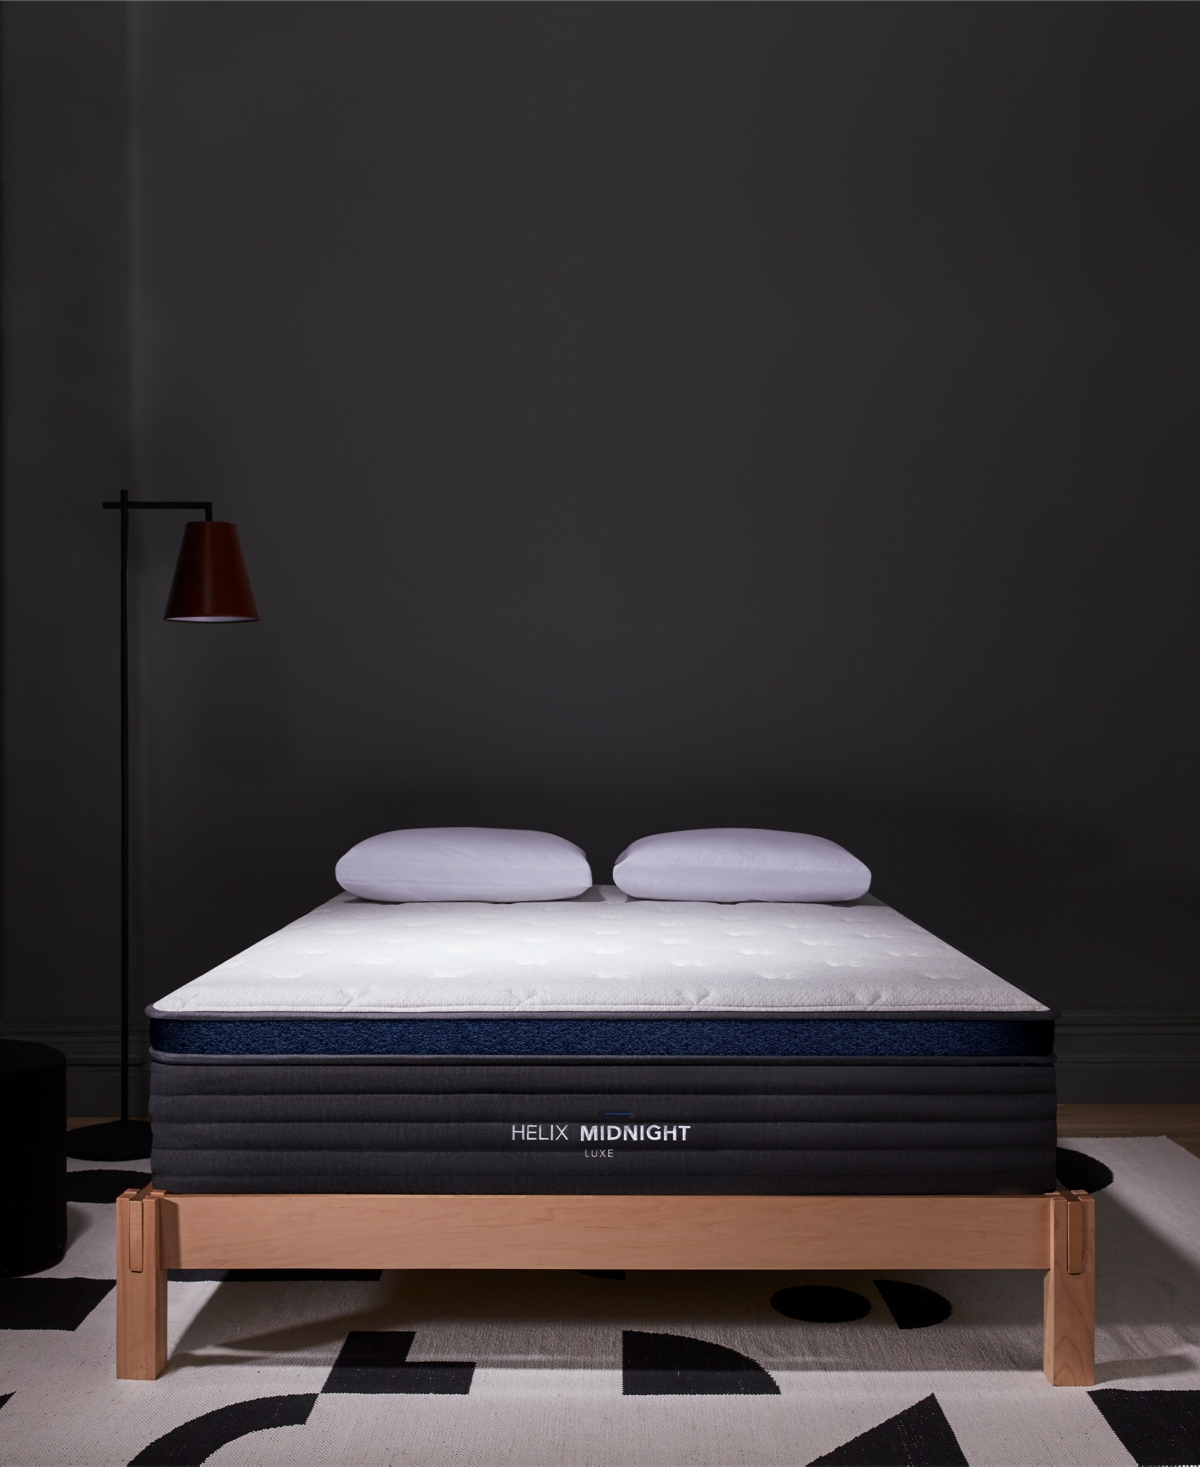 Brooklyn Bedding Helix Midnight Luxe 13.5" Medium Firm Mattress In No Color